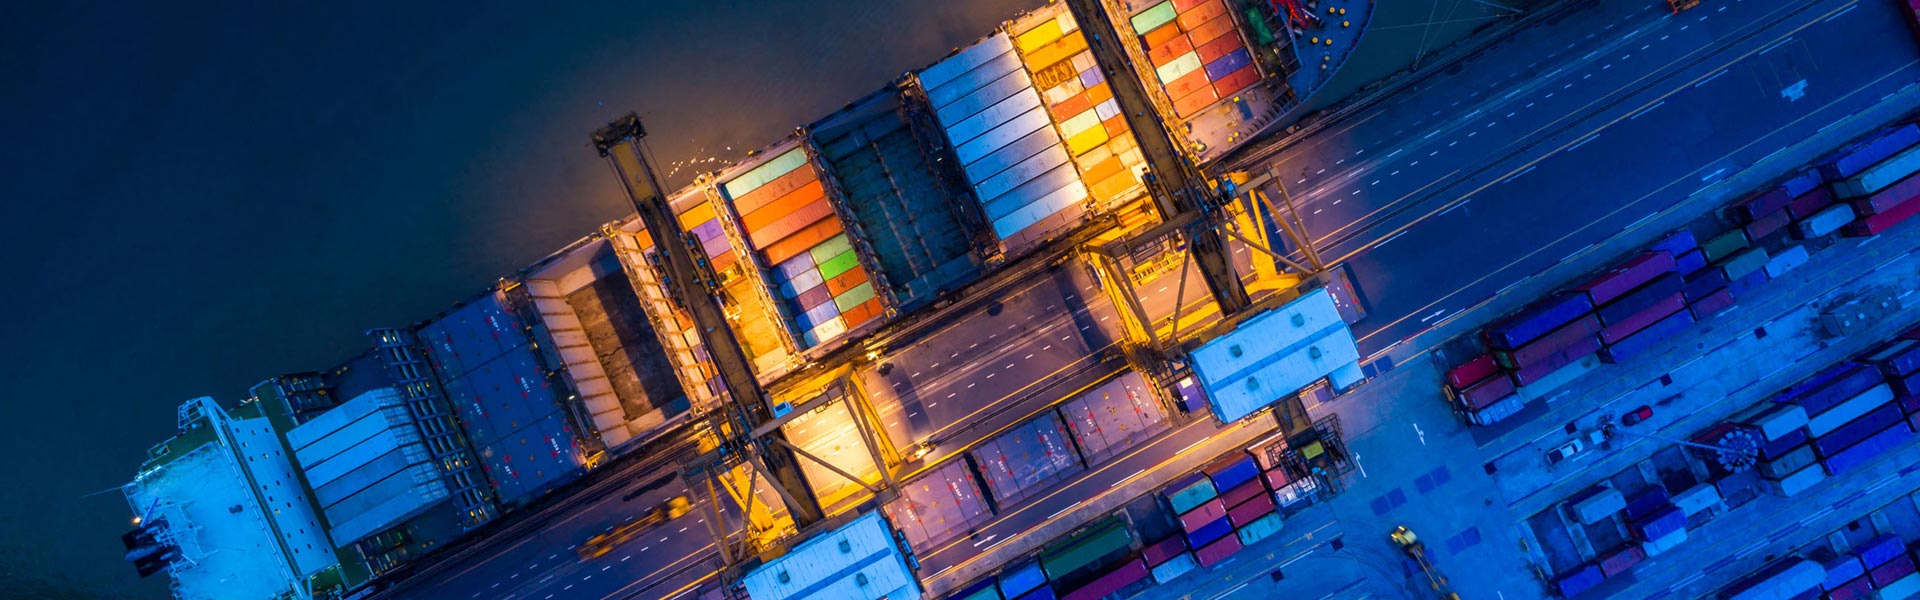 Deutsche Telekom and SAP Expand Partnership to the Internet of Things for Real-Time Logistics